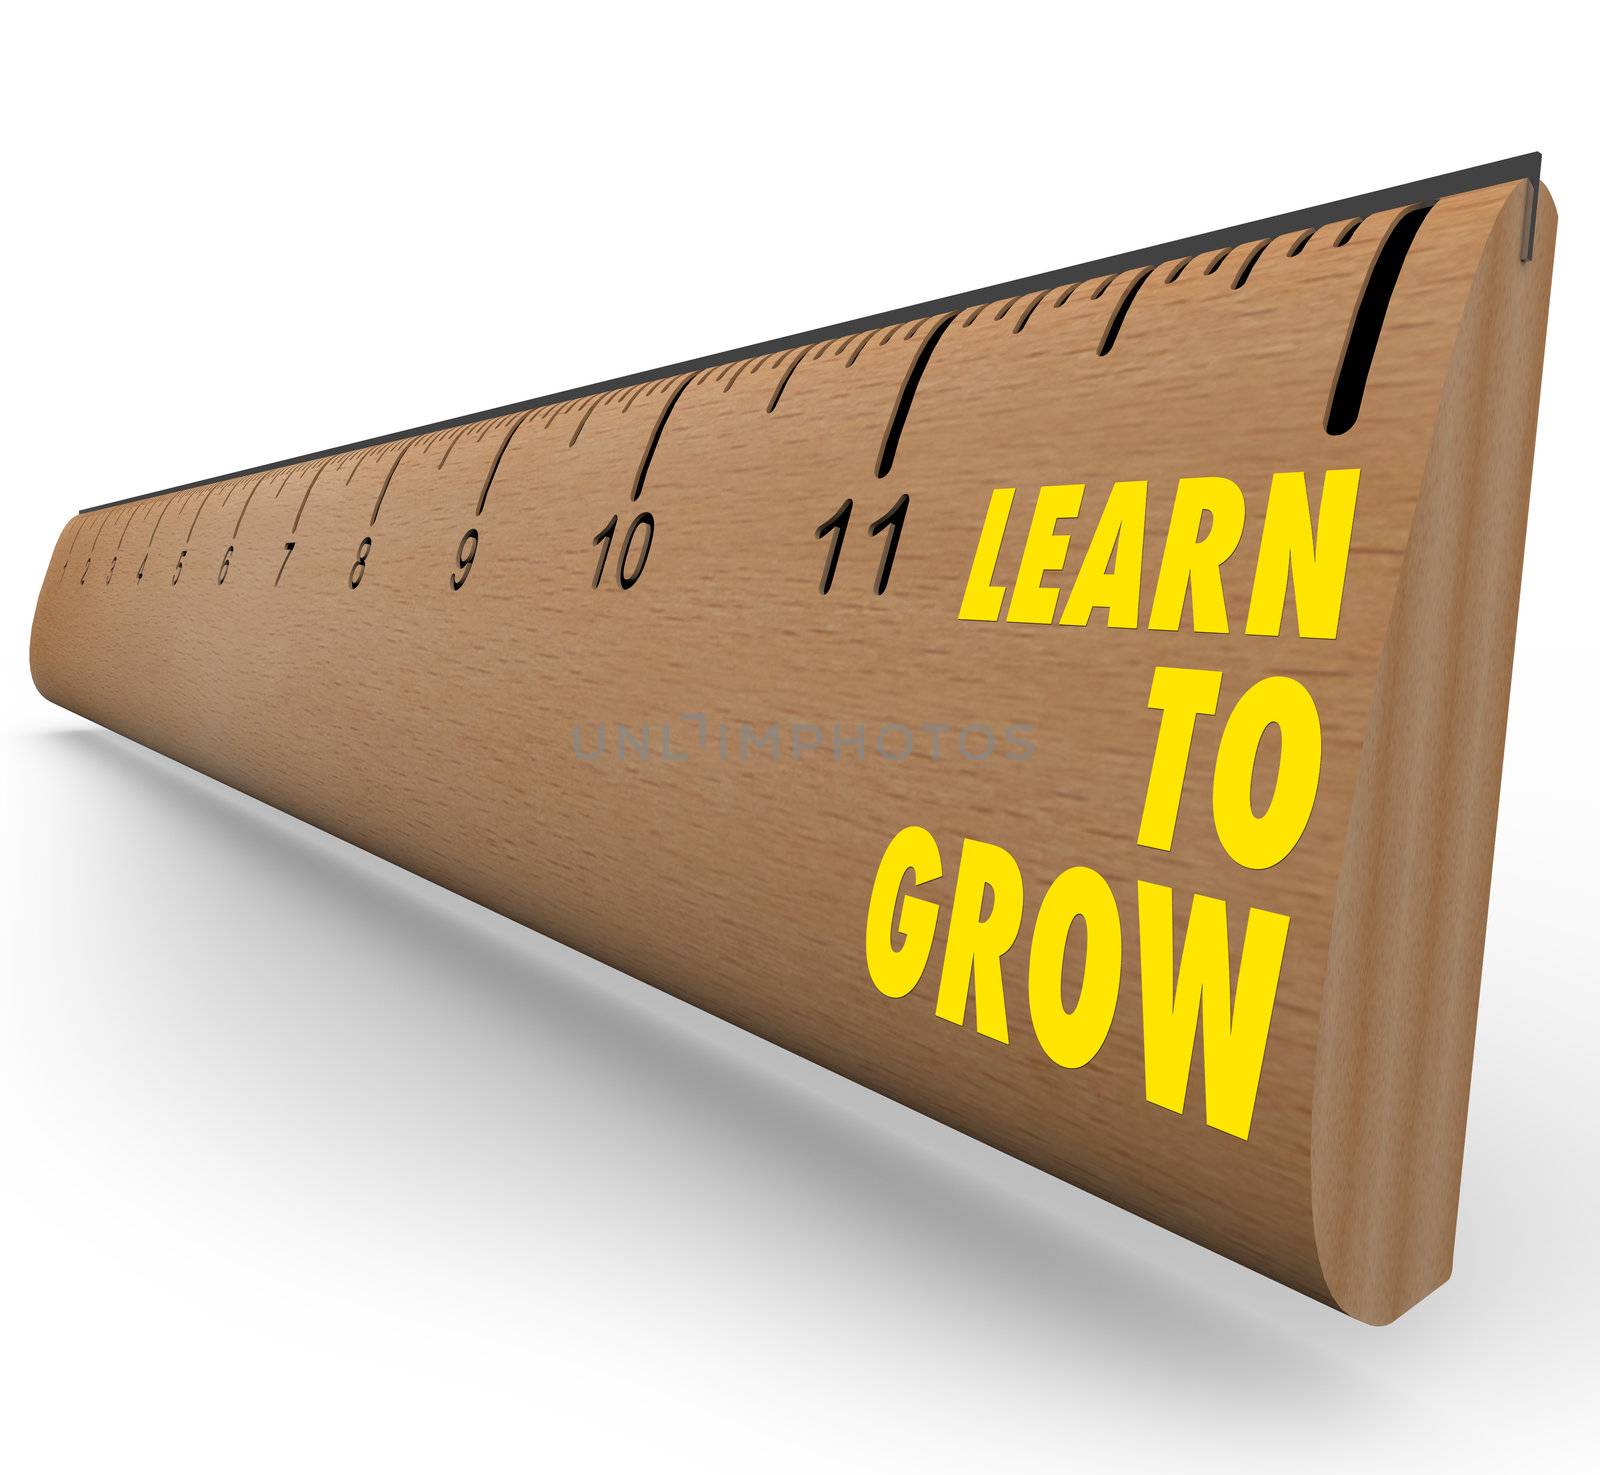 A wooden ruler with the words Learn to Grow, symbolizing the benefits of lifelong learning